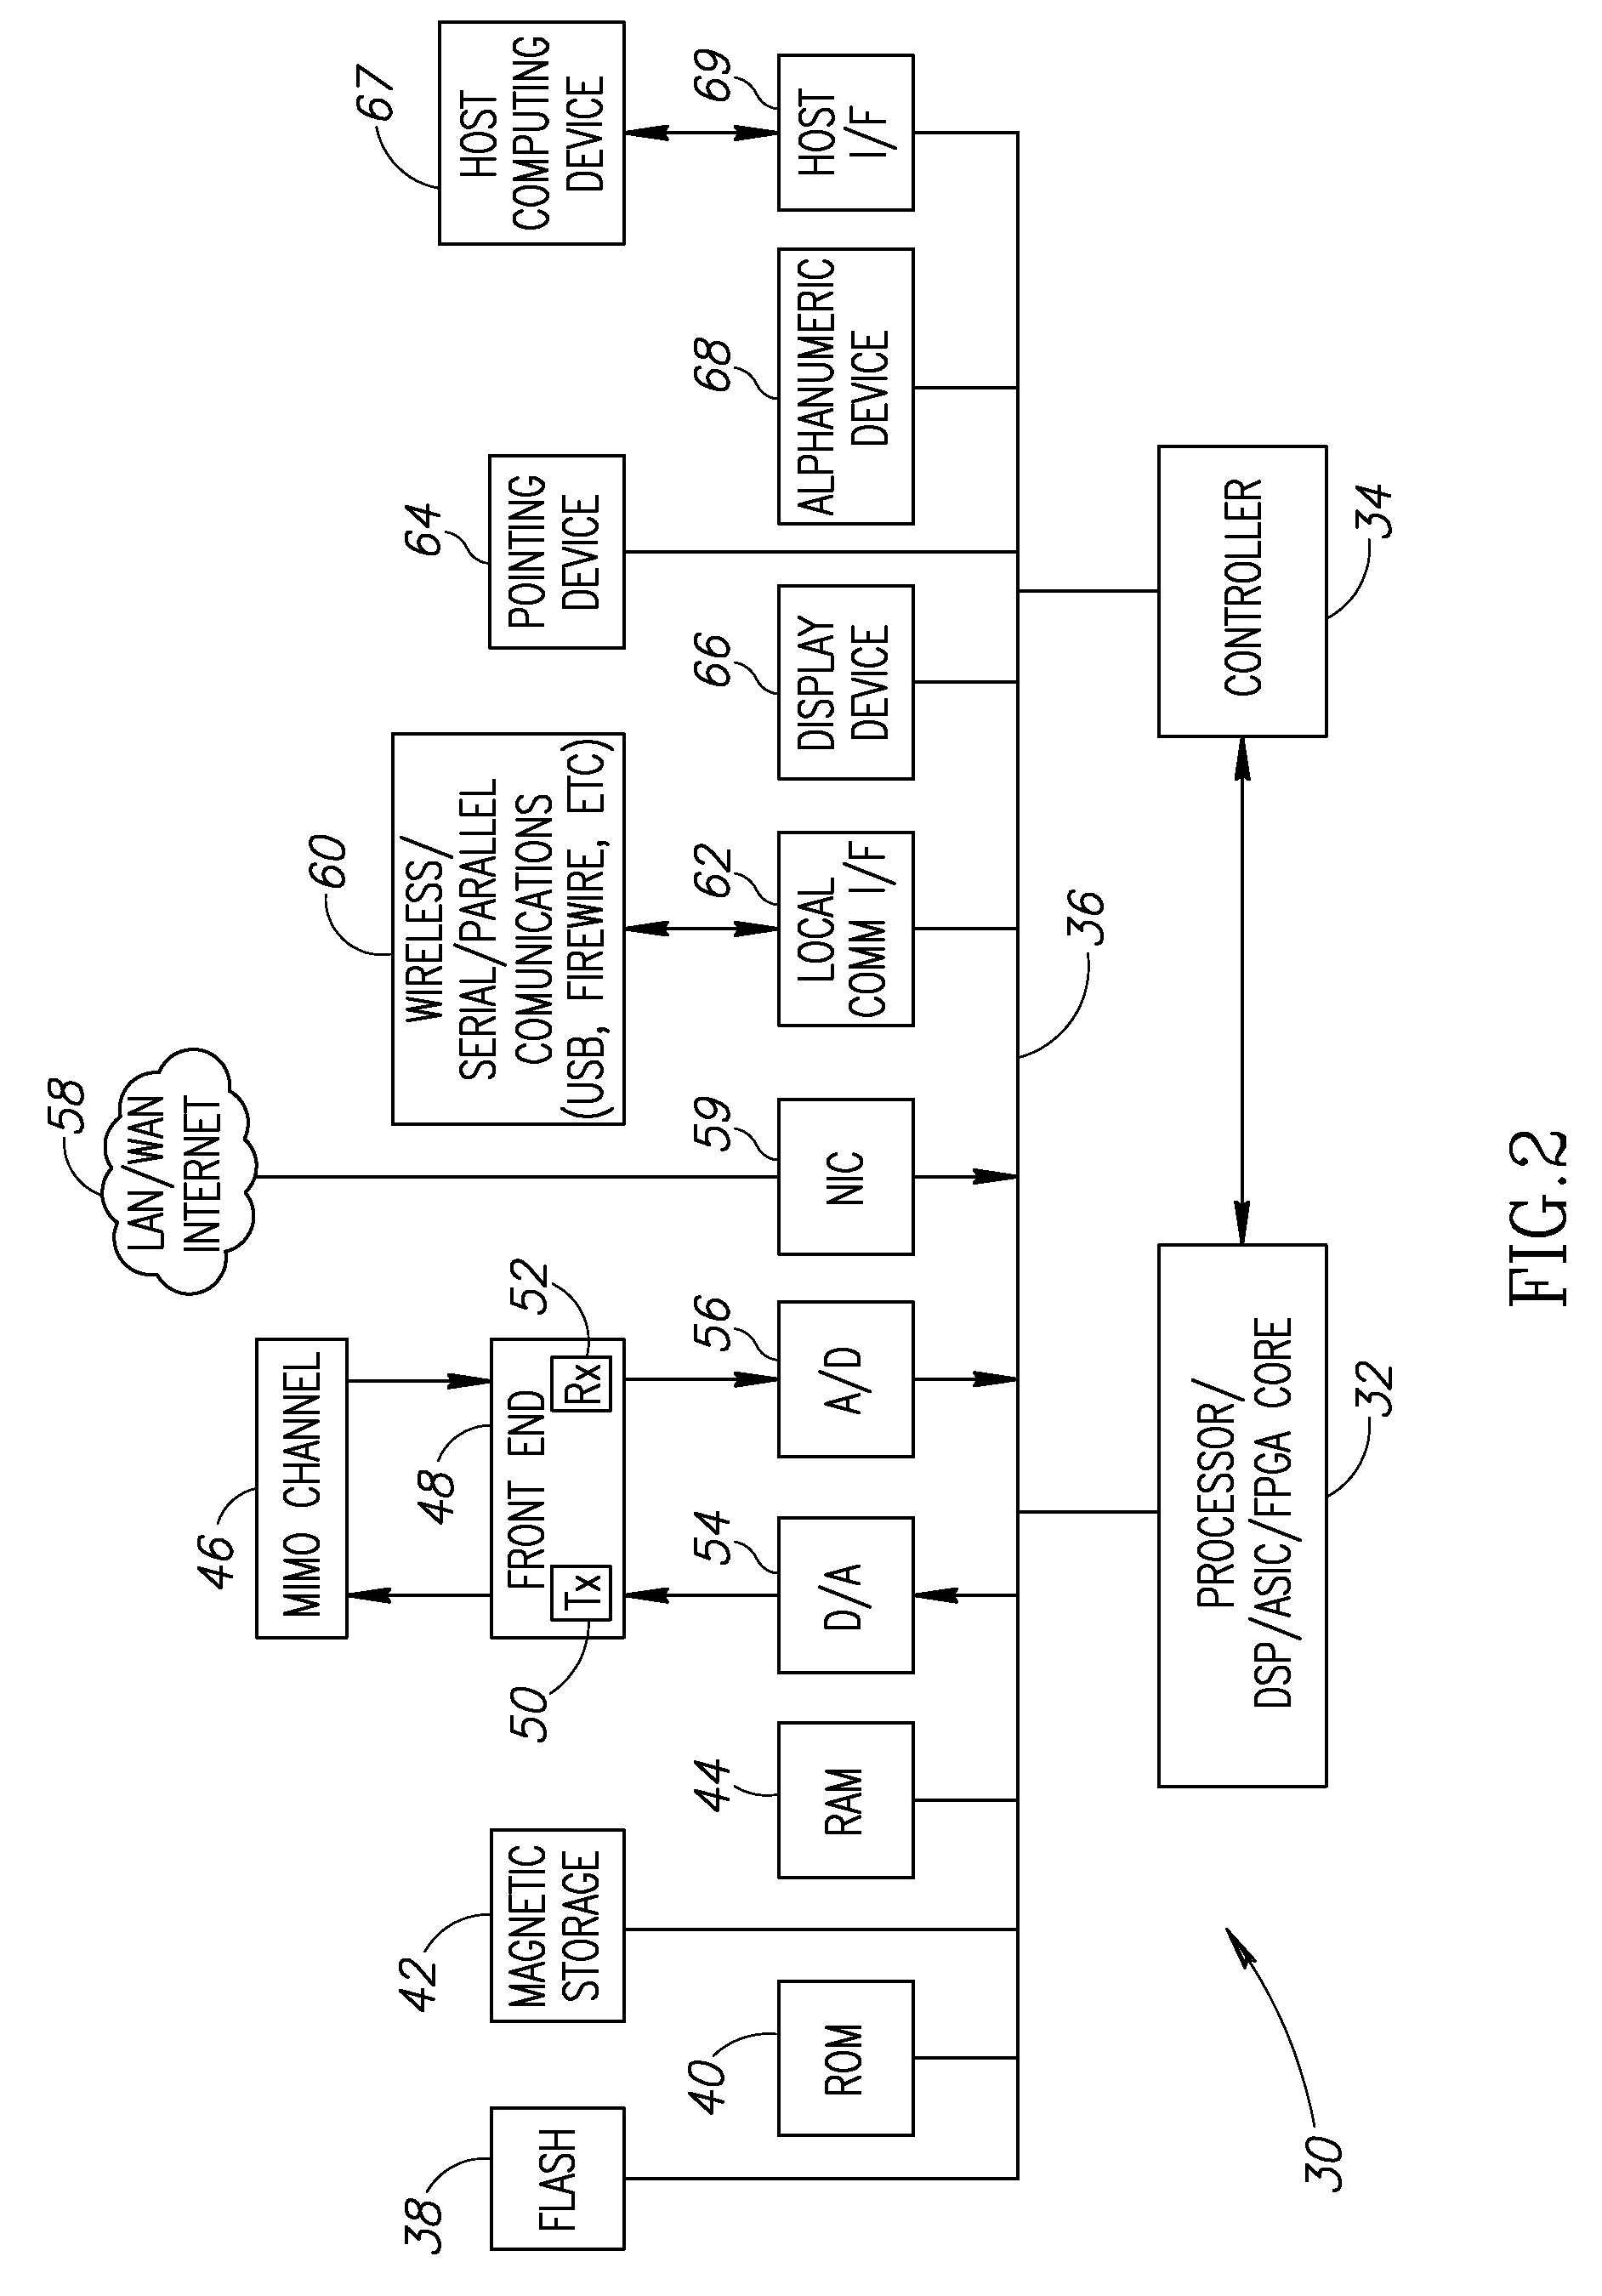 Multiple-input multiple-output (MIMO) detector incorporating efficient signal point search and soft information refinement